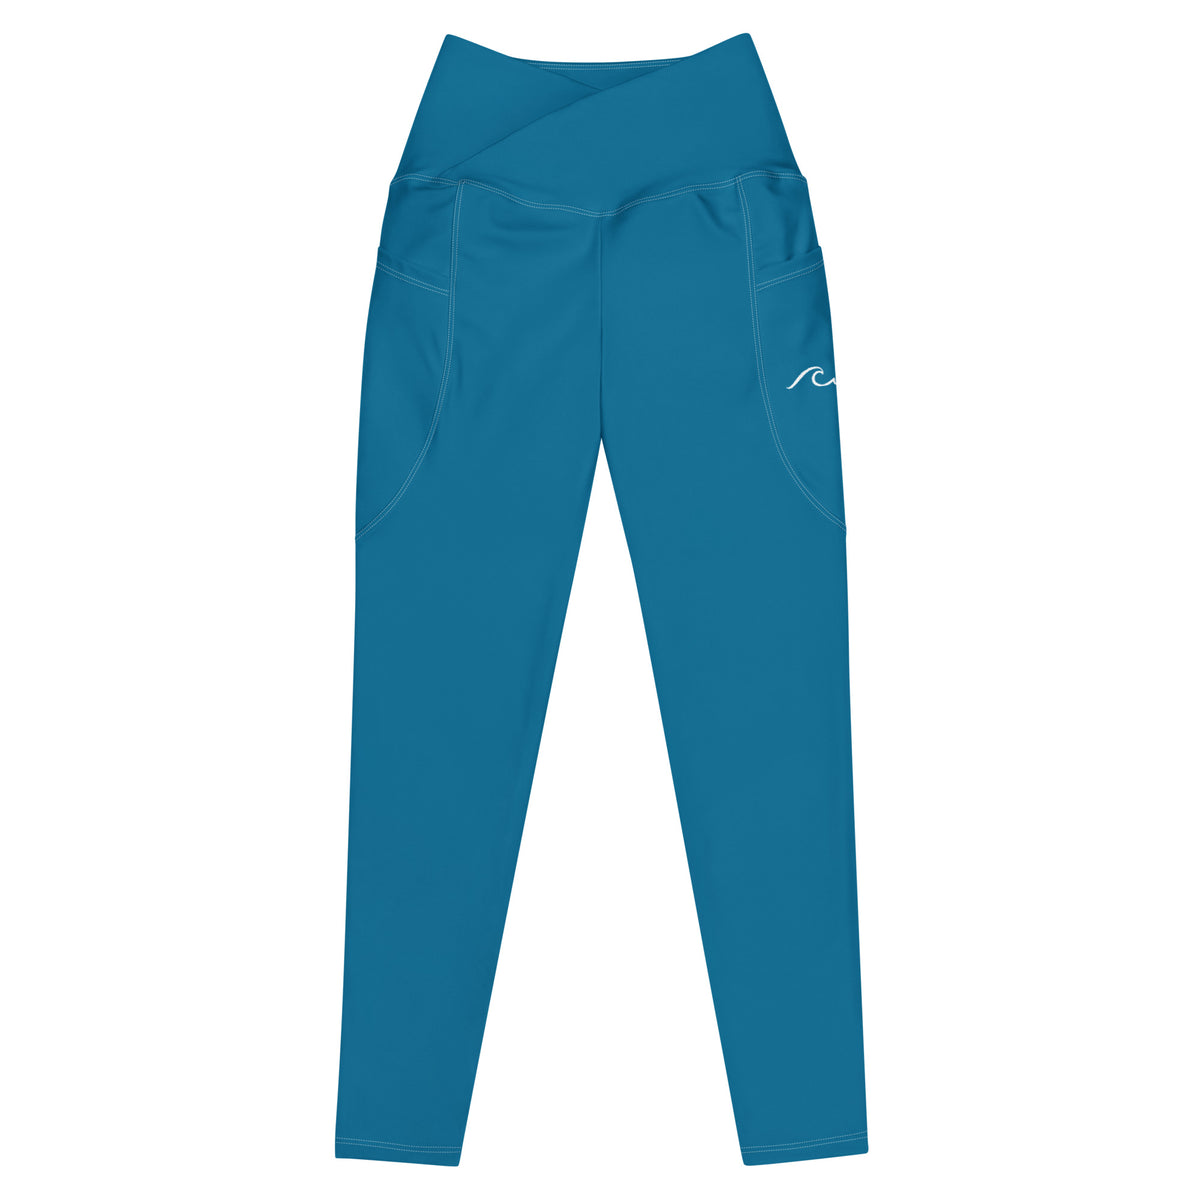 Naples Blue UPF 50+ Crossover leggings with pockets